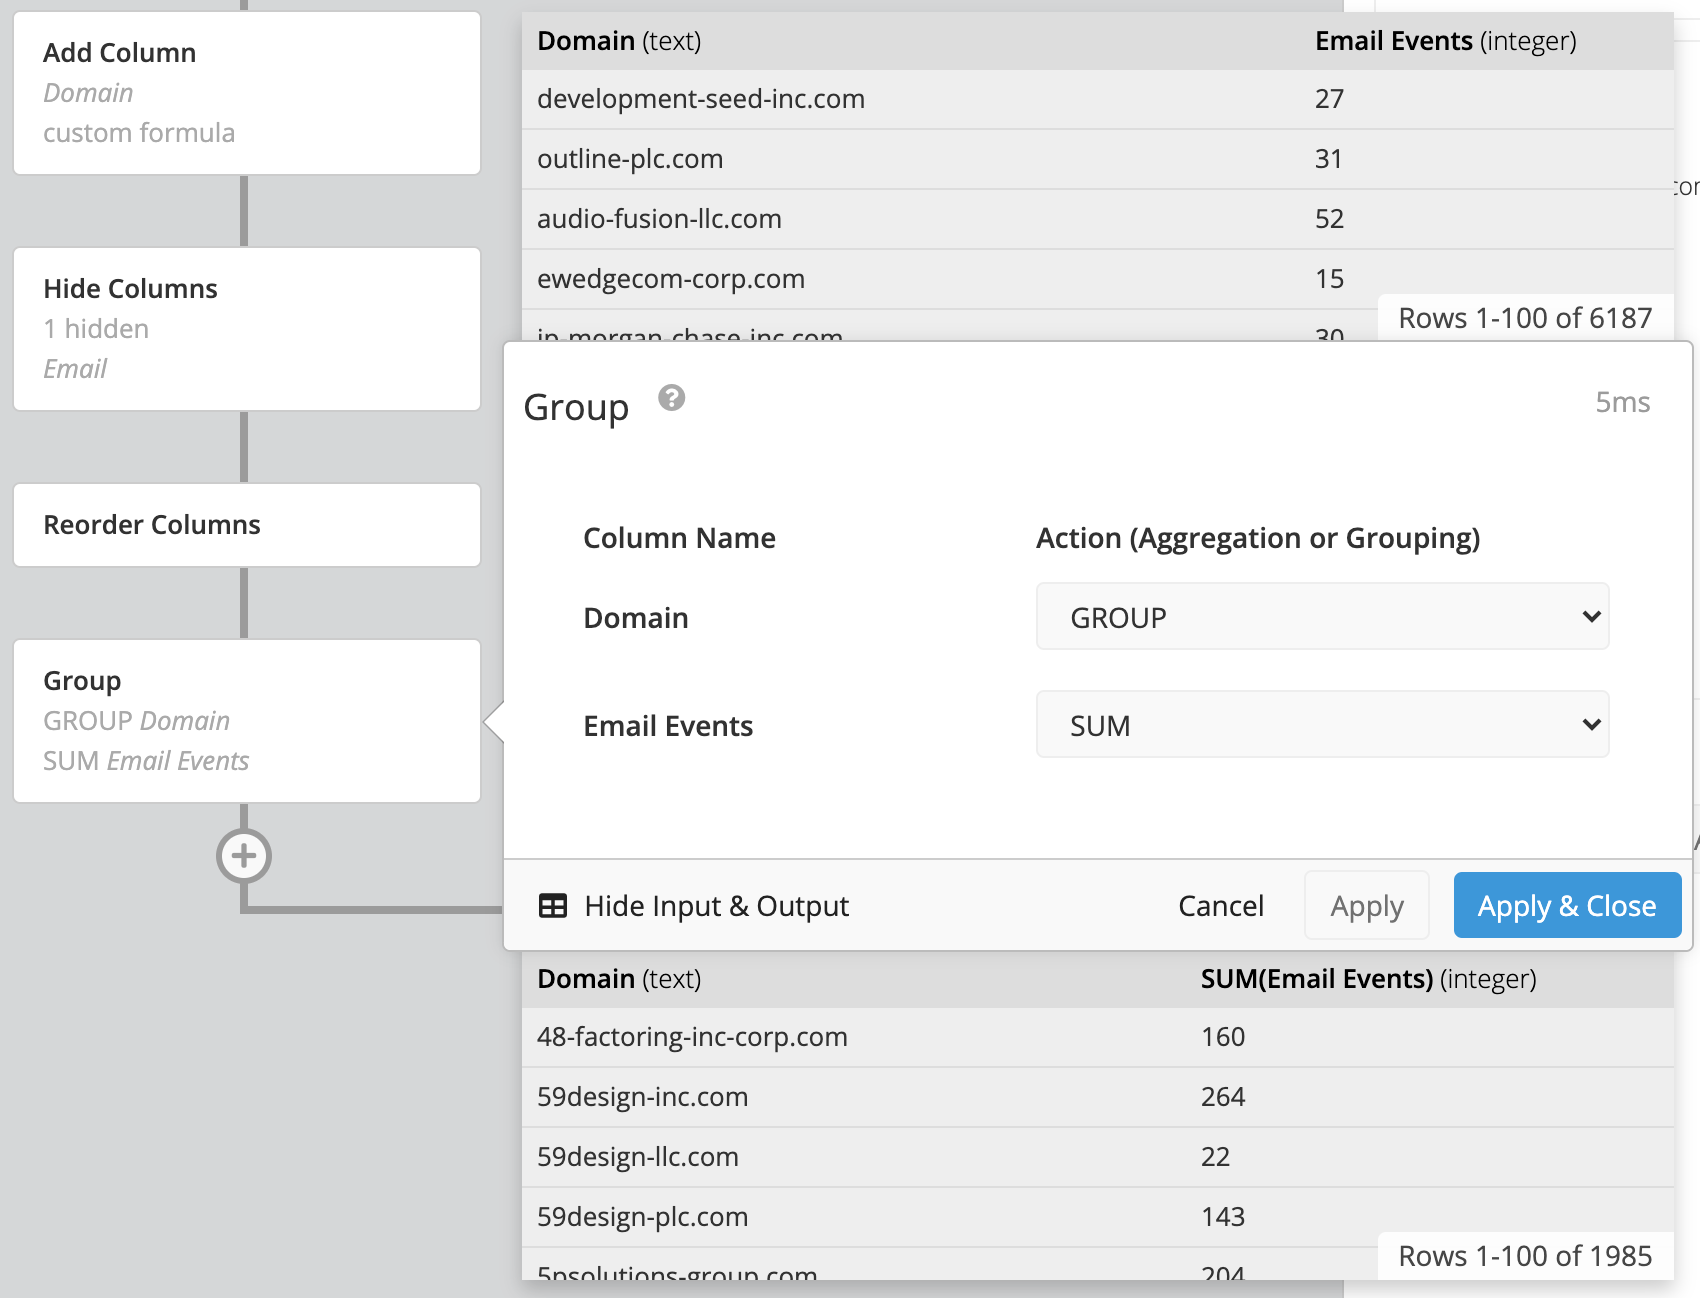 Add a Group step in Pipeline to group by Domain, with SUM as the aggregation